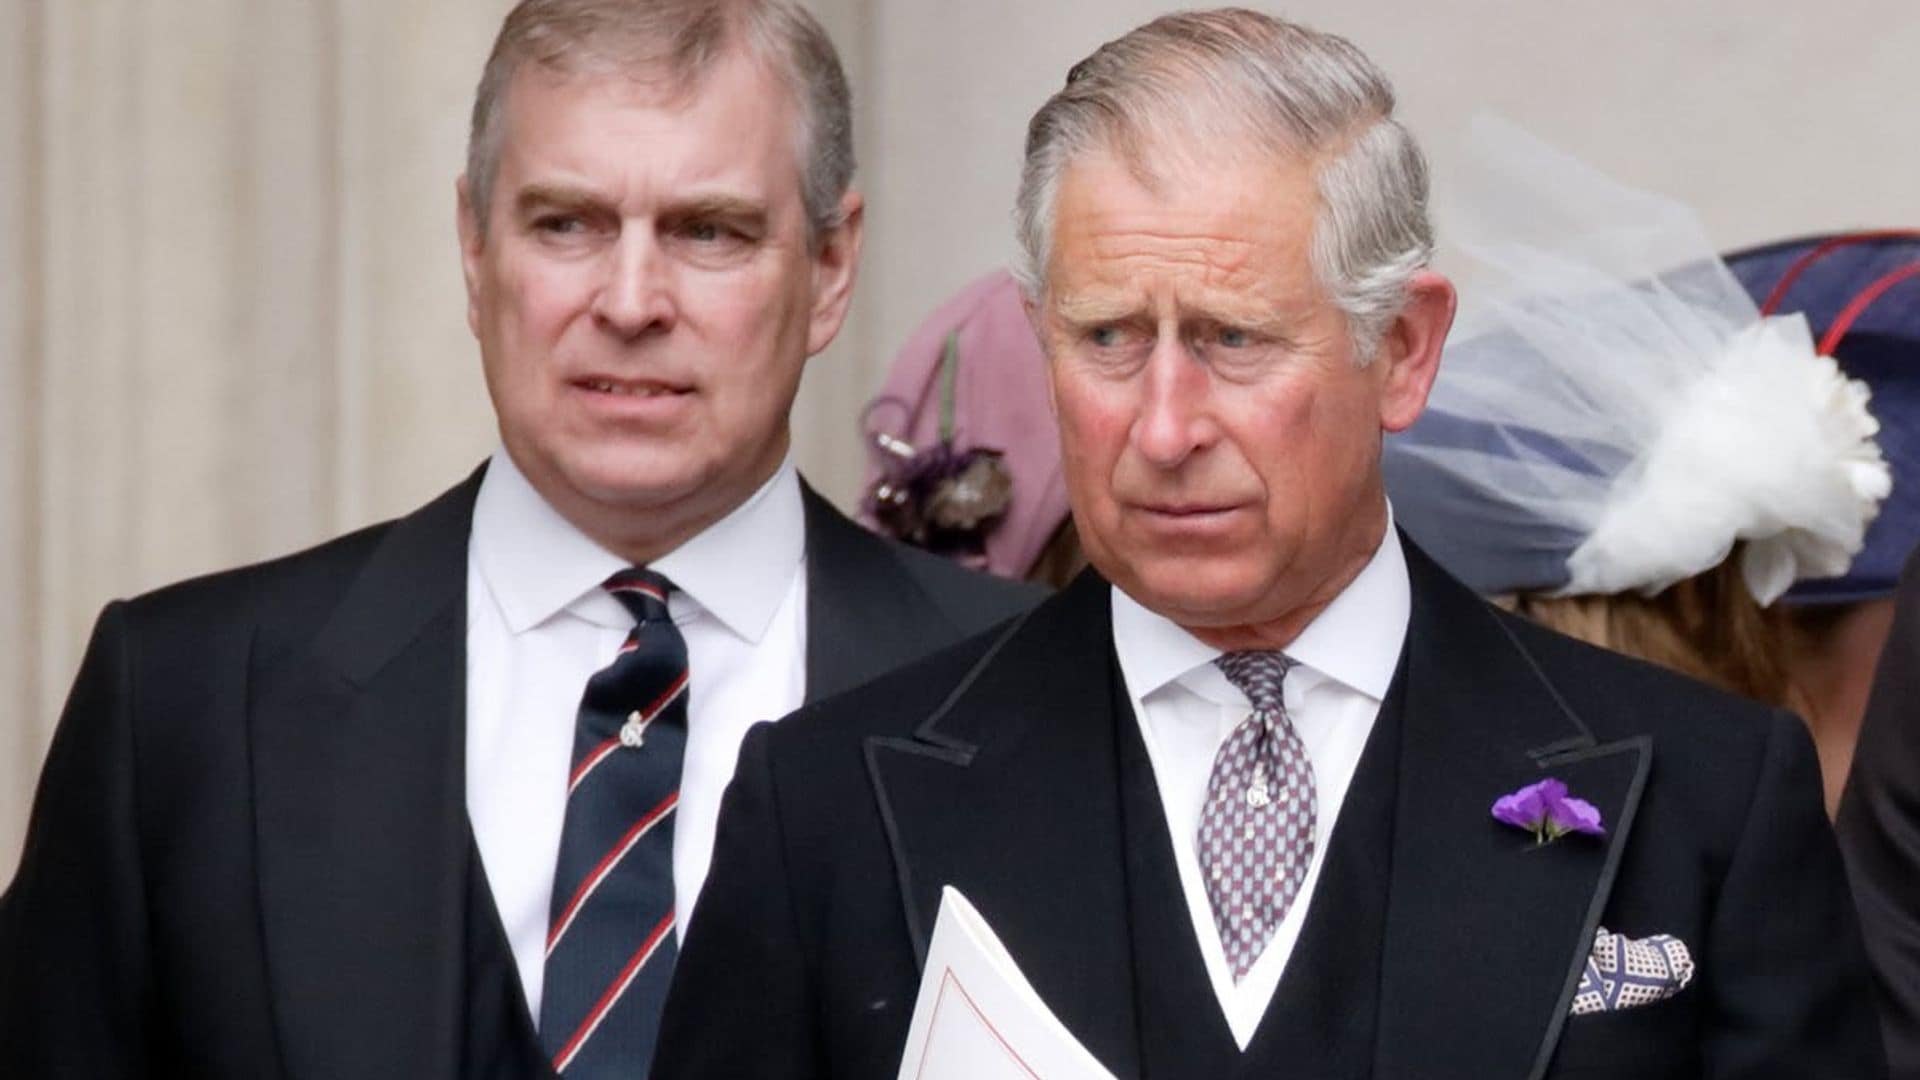 Watch what Prince Charles did when asked about his brother Prince Andrew